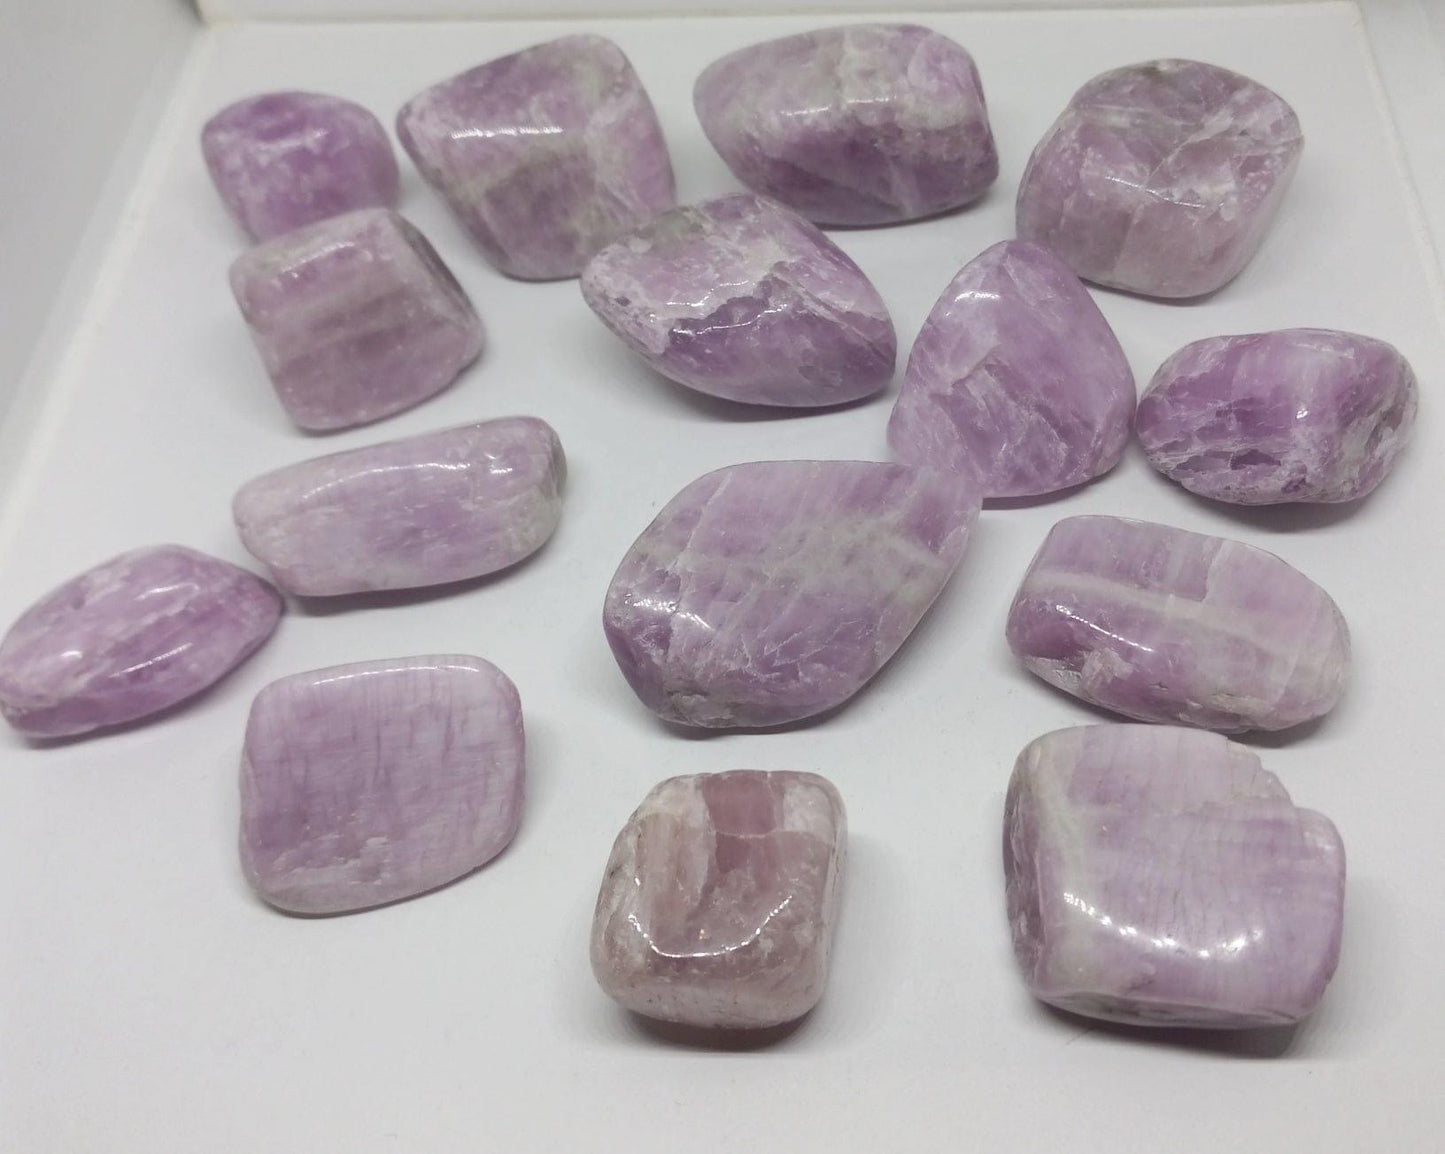 Kunzite Natural Crystal Tumbled Top Quality Purple Kunzite Stone - Guiding Lights Boutique